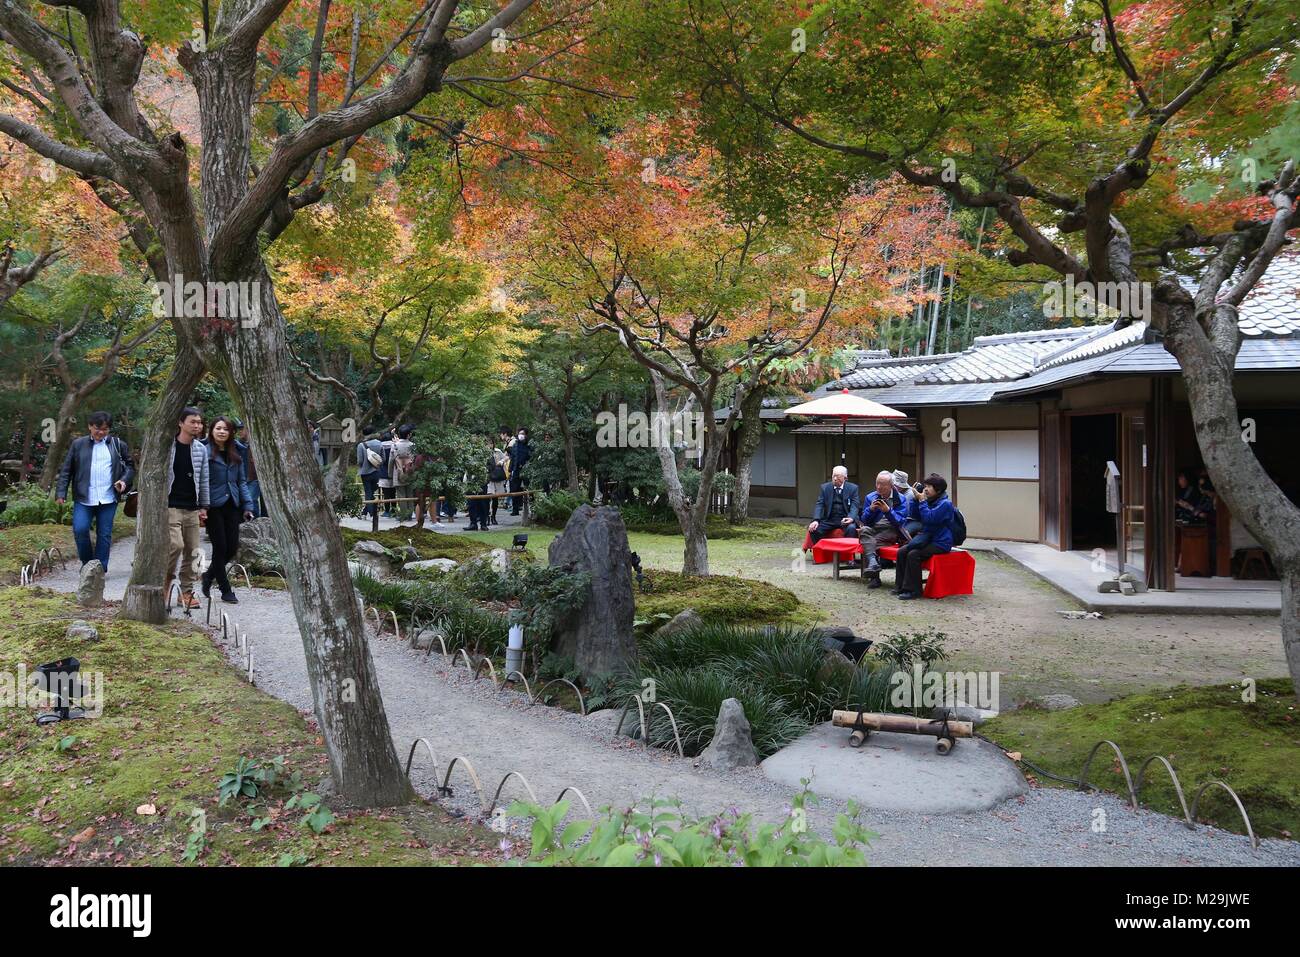 KYOTO, JAPAN - NOVEMBER 26, 2016: People visit Kodaiji temple gardens in Kyoto, Japan. 19.7 million foreign tourists visited Japan in 2015. Stock Photo